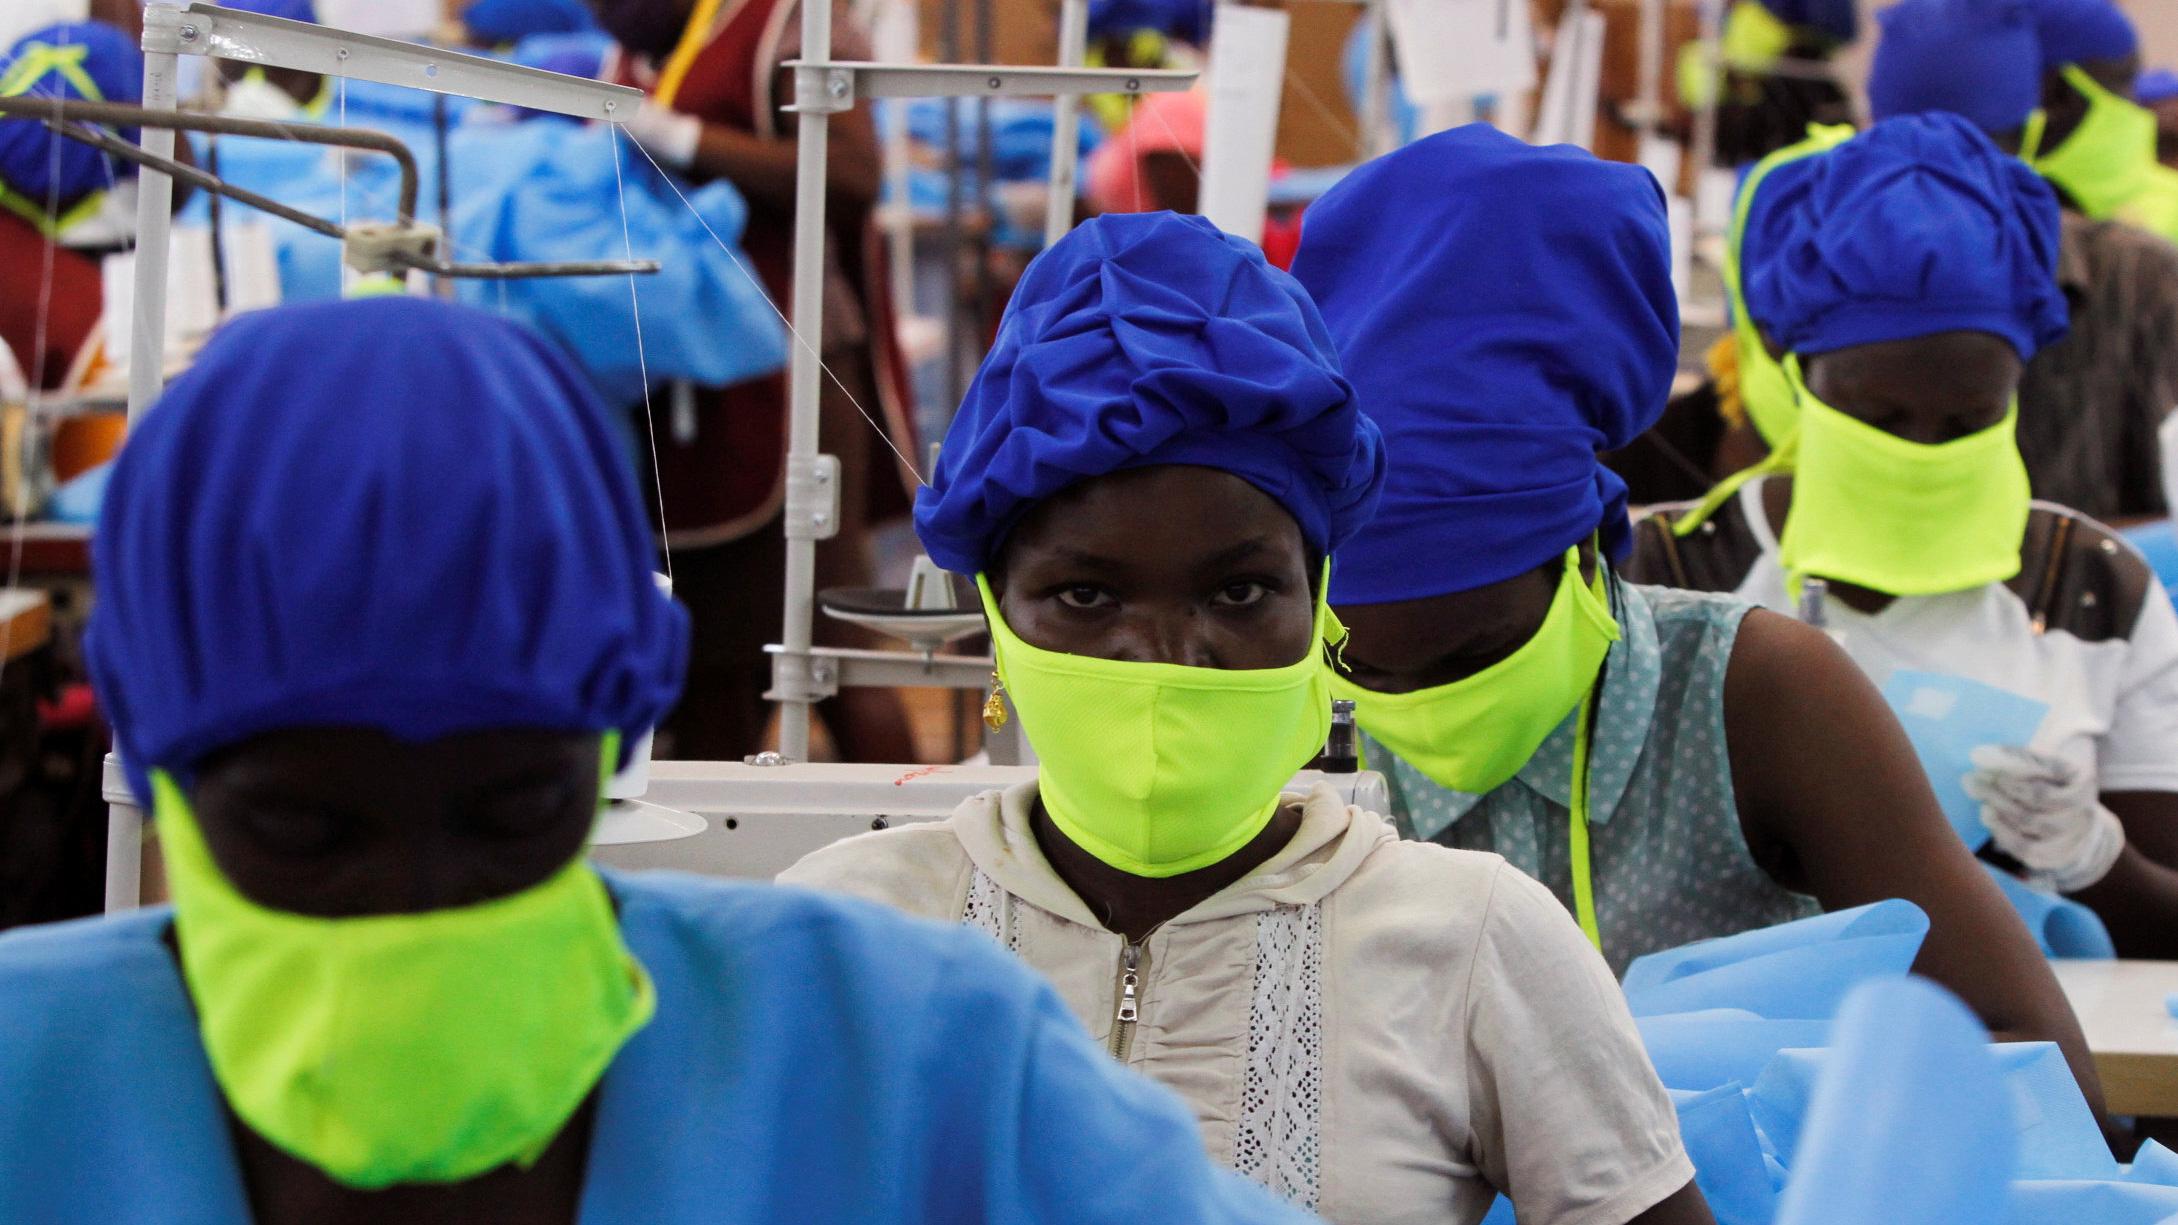 The photo shows a row of workers wearing protective blue suits and bright green facemasks working in a factory. 